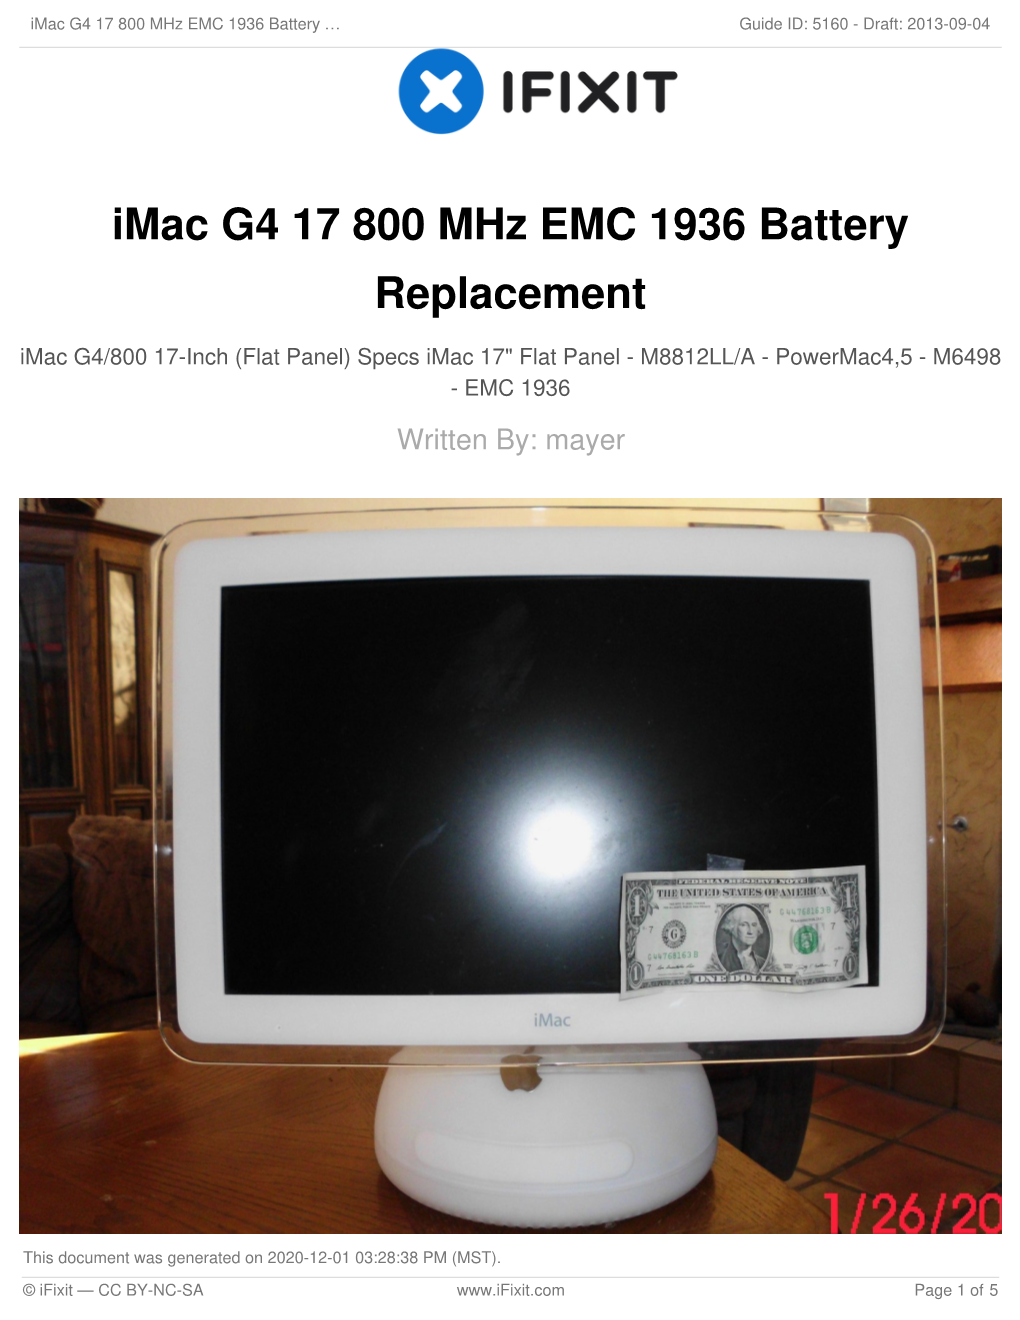 Imac G4 17 800 Mhz EMC 1936 Battery Replacement